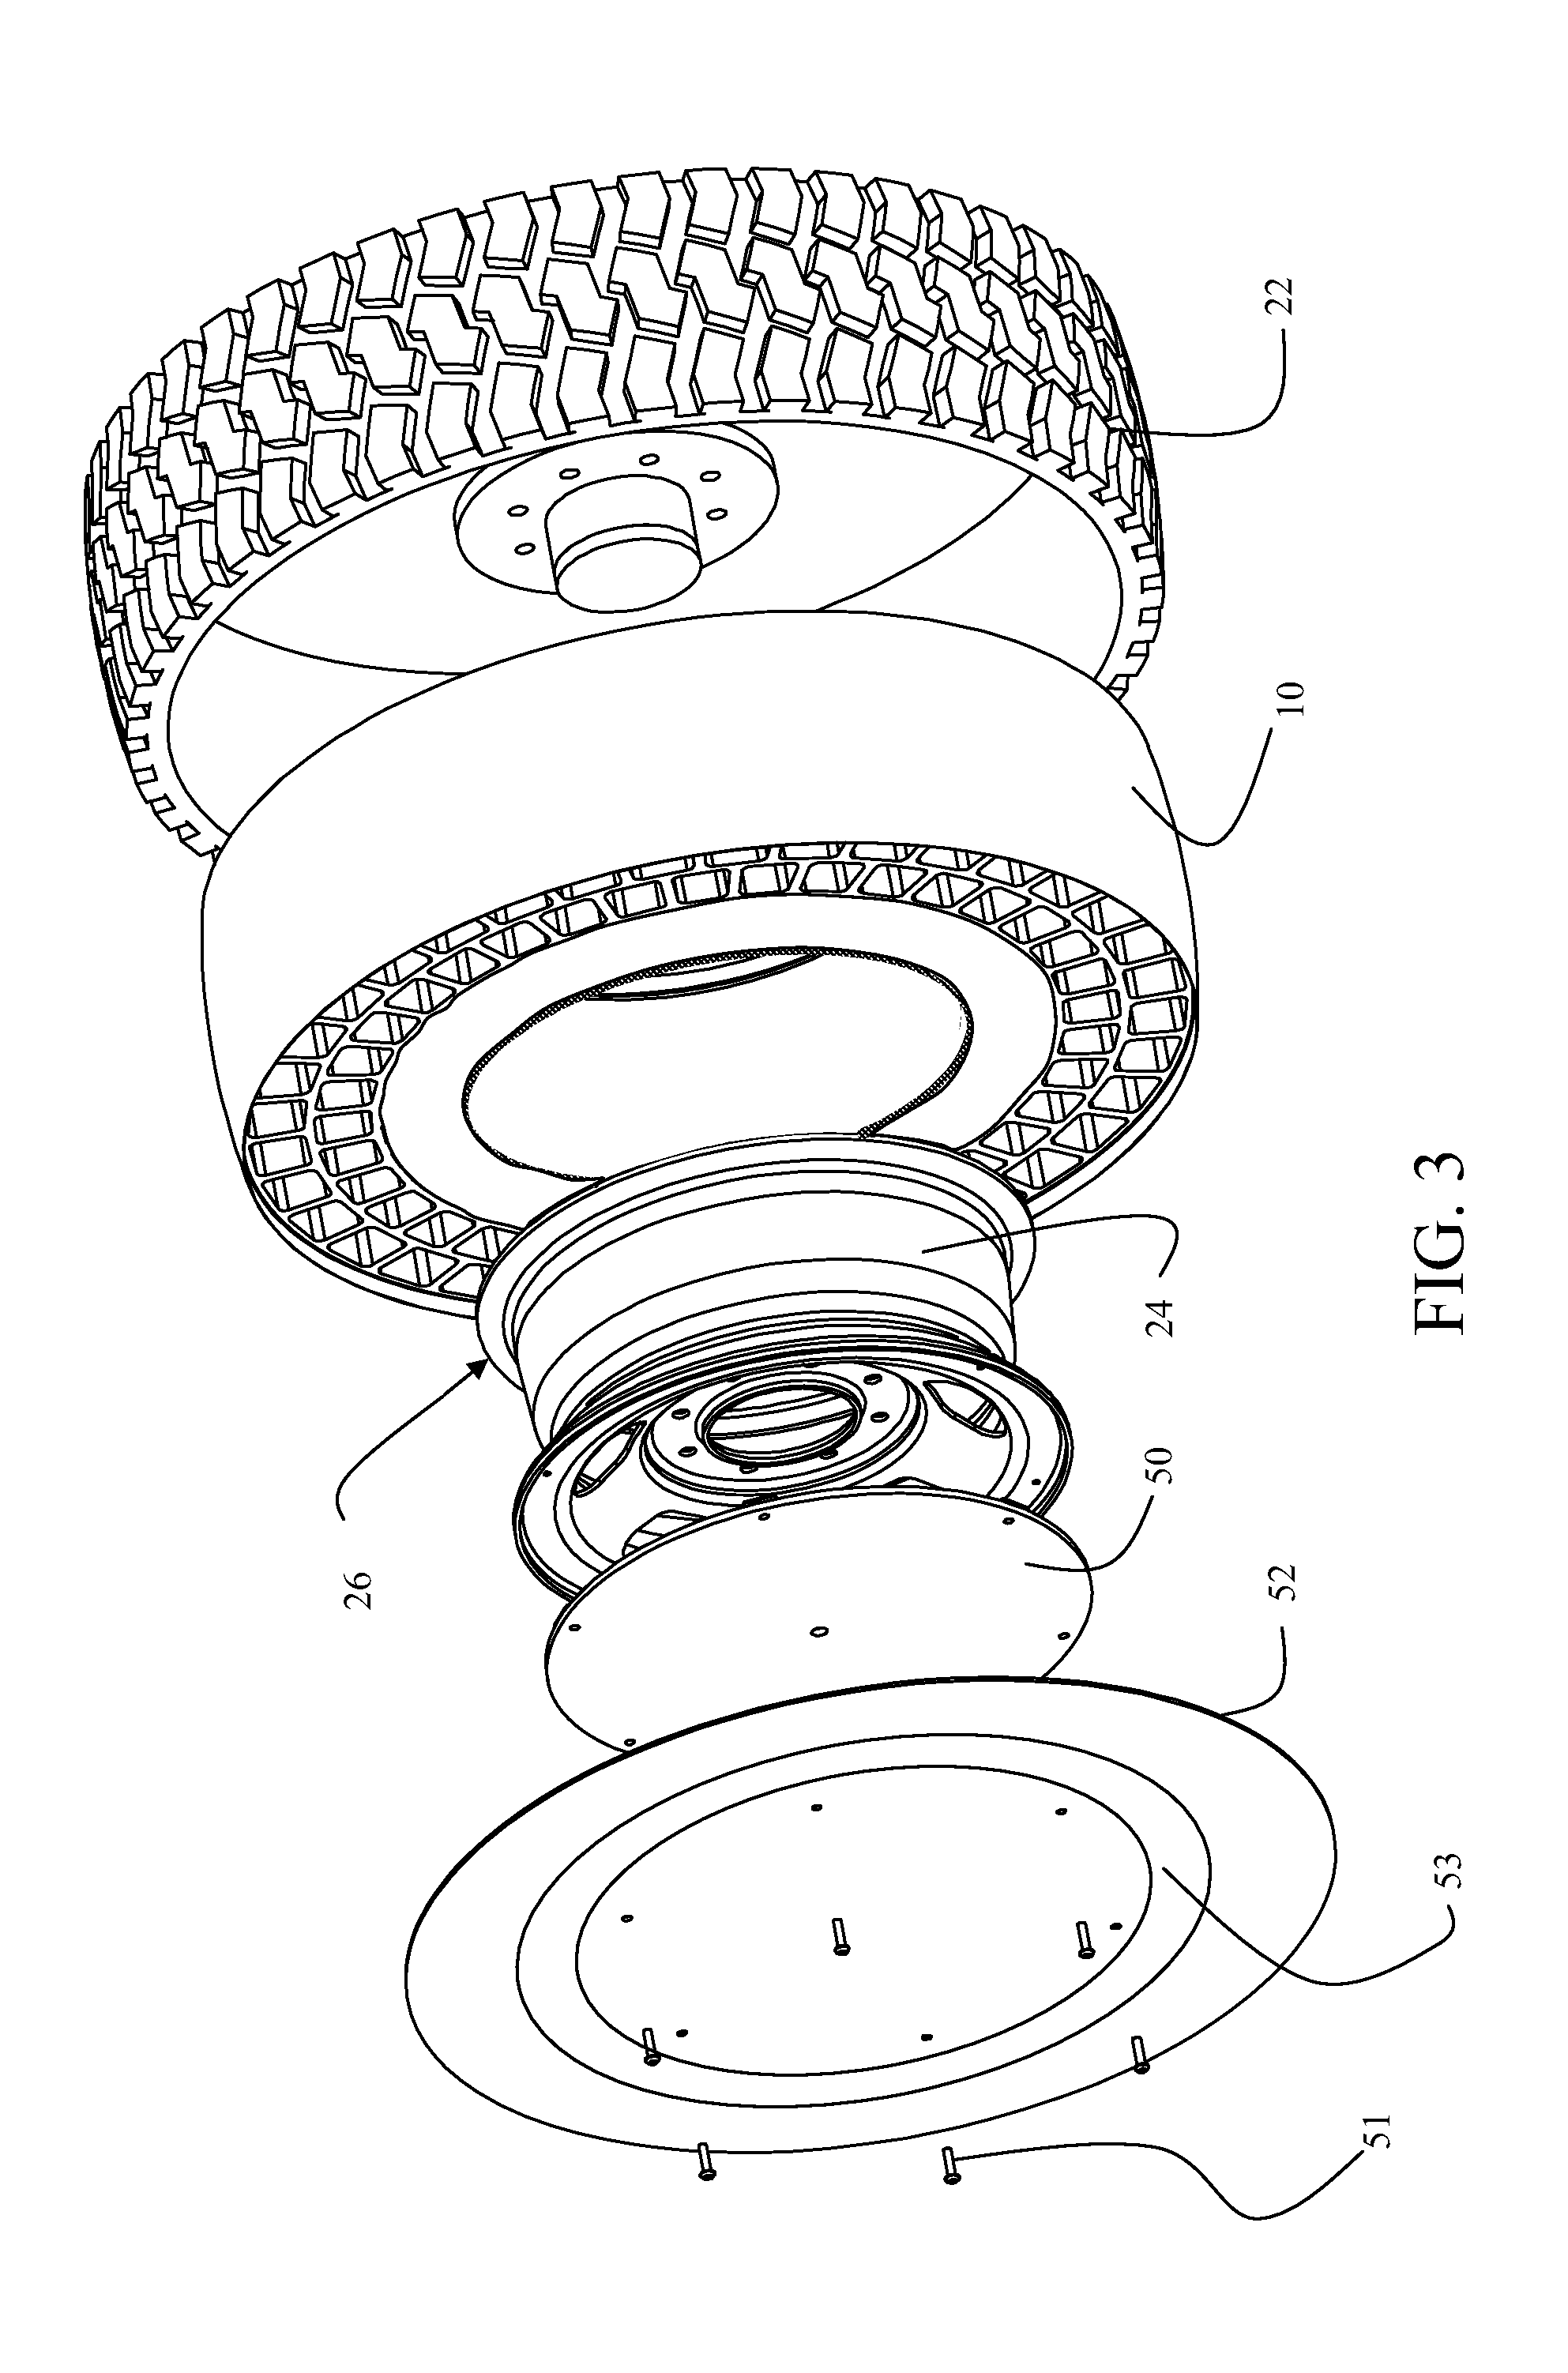 Non-pneumatic survivable tire mounting system for conventional wheels